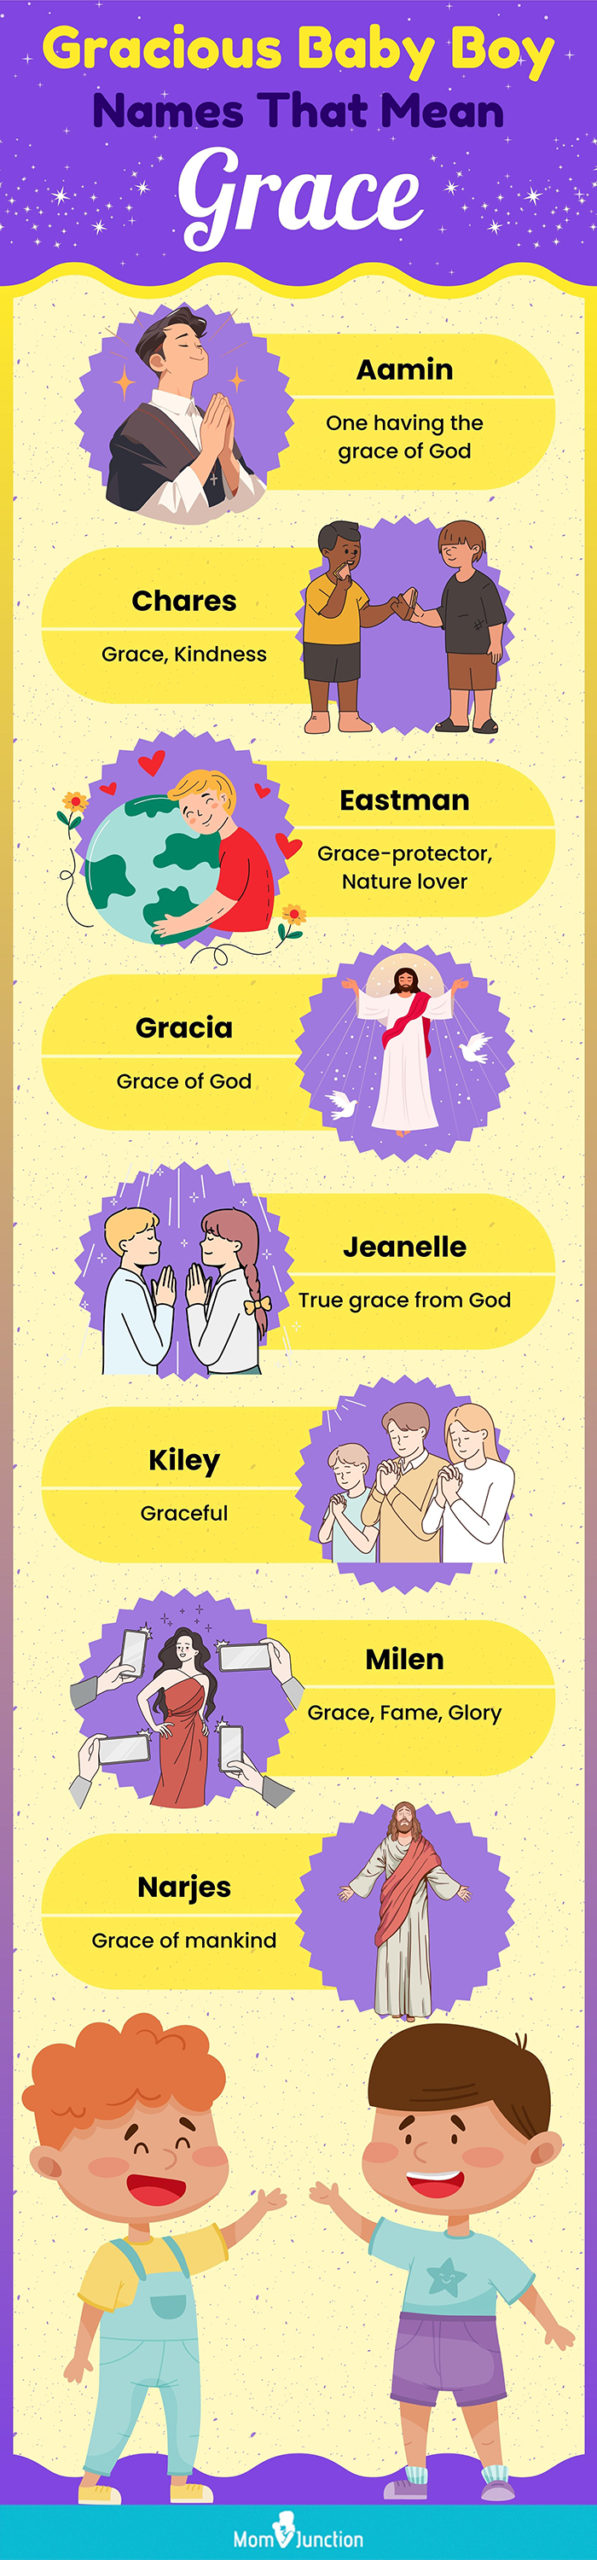 gracious baby boy names that mean grace (infographic)